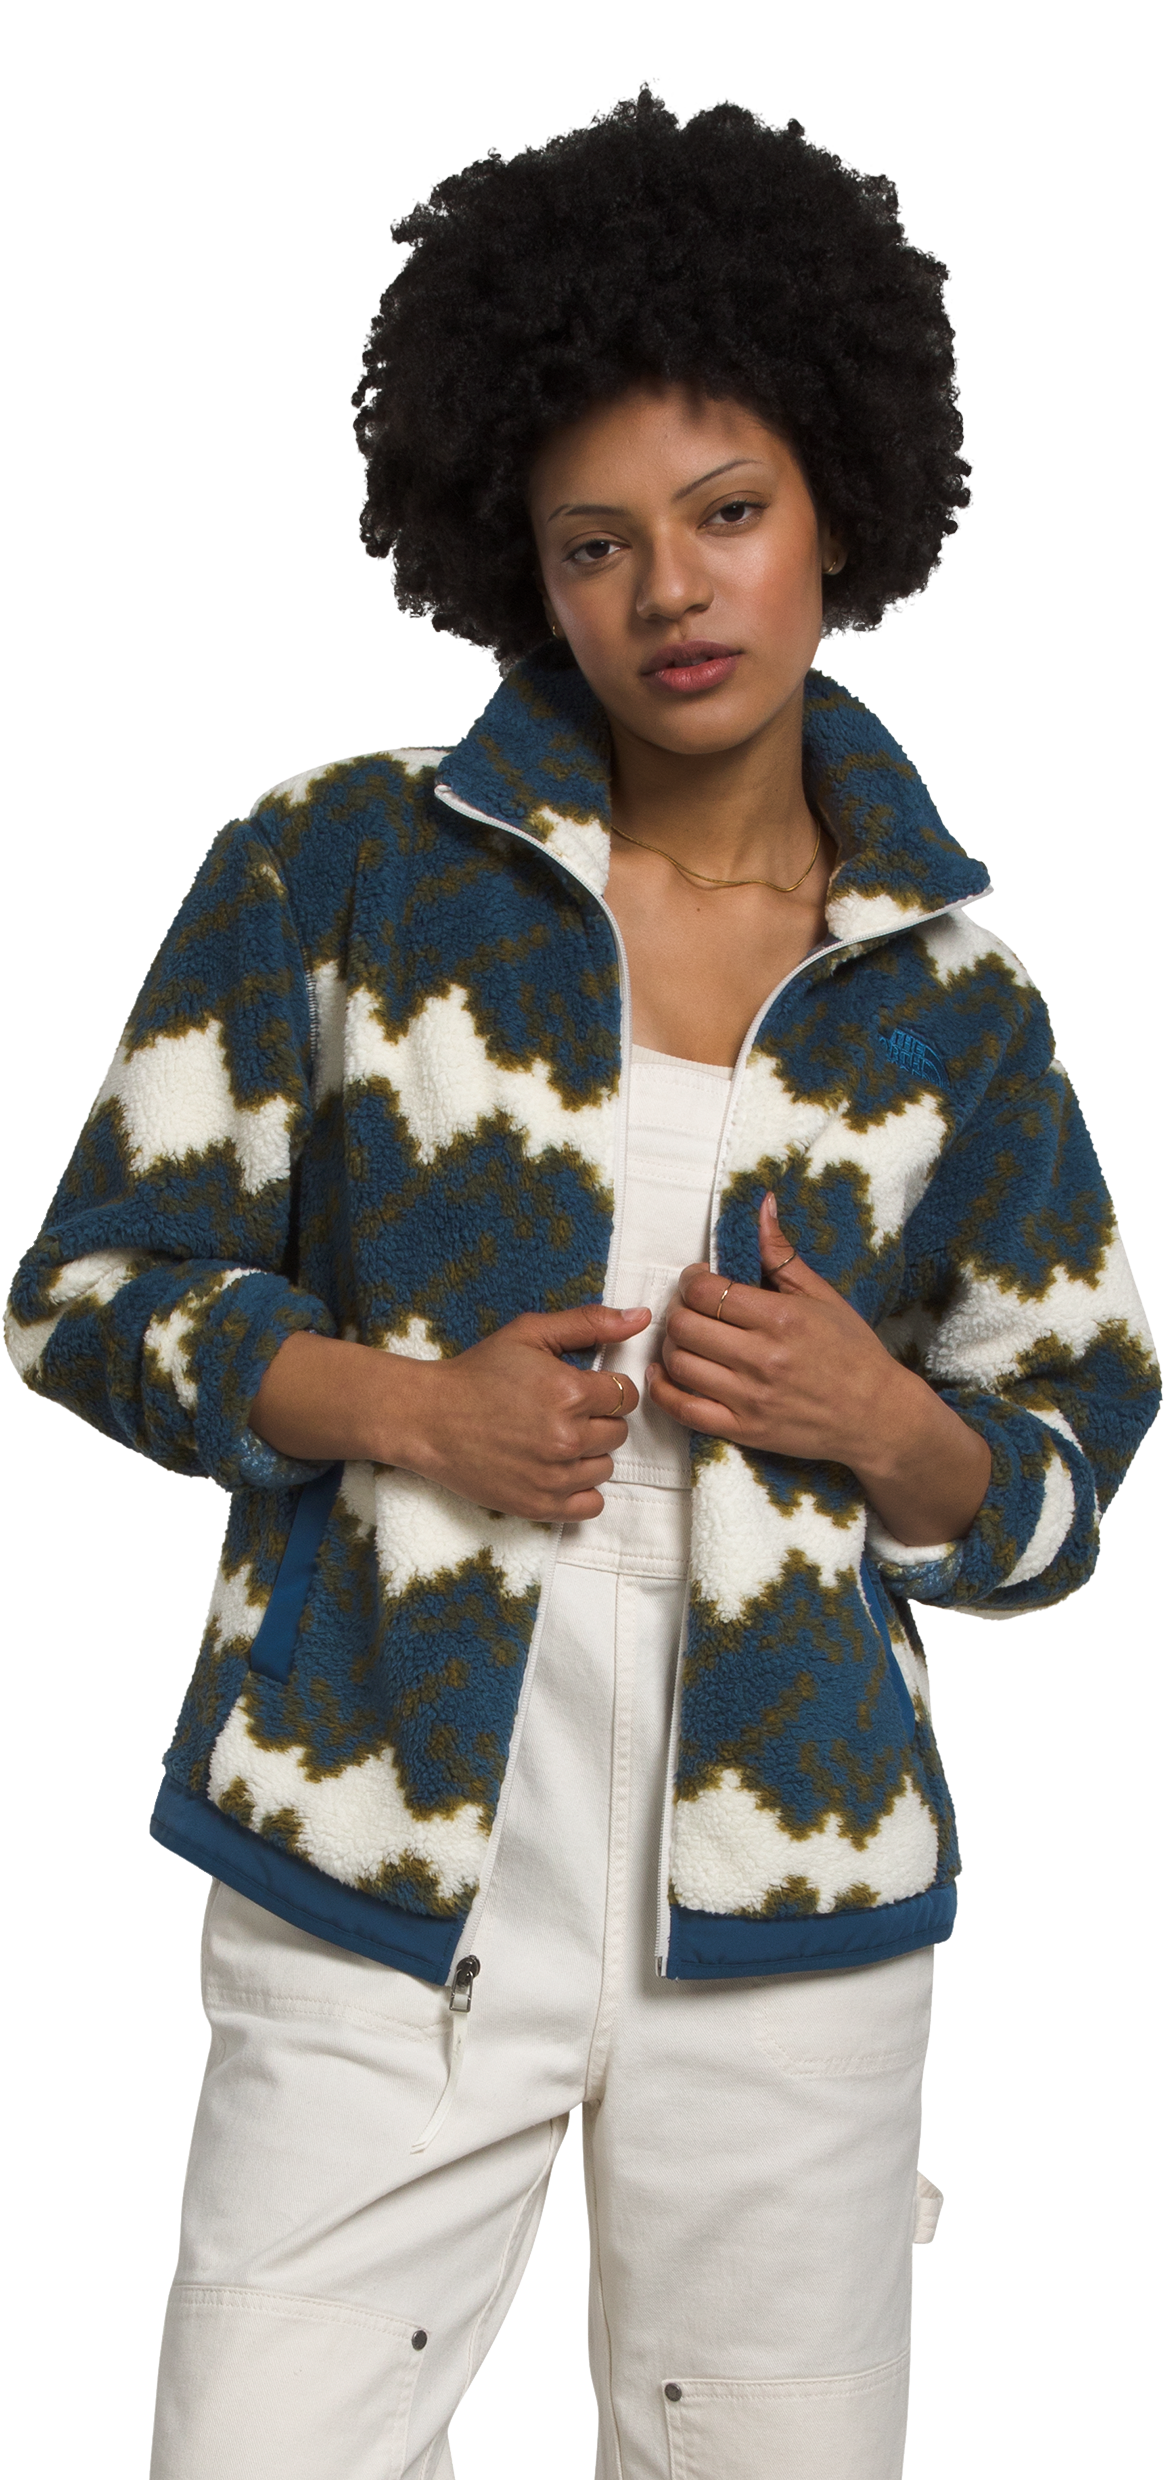 The North Face Campshire Fleece Jacket for Ladies - Shady Blue Mountain Geo Print - L